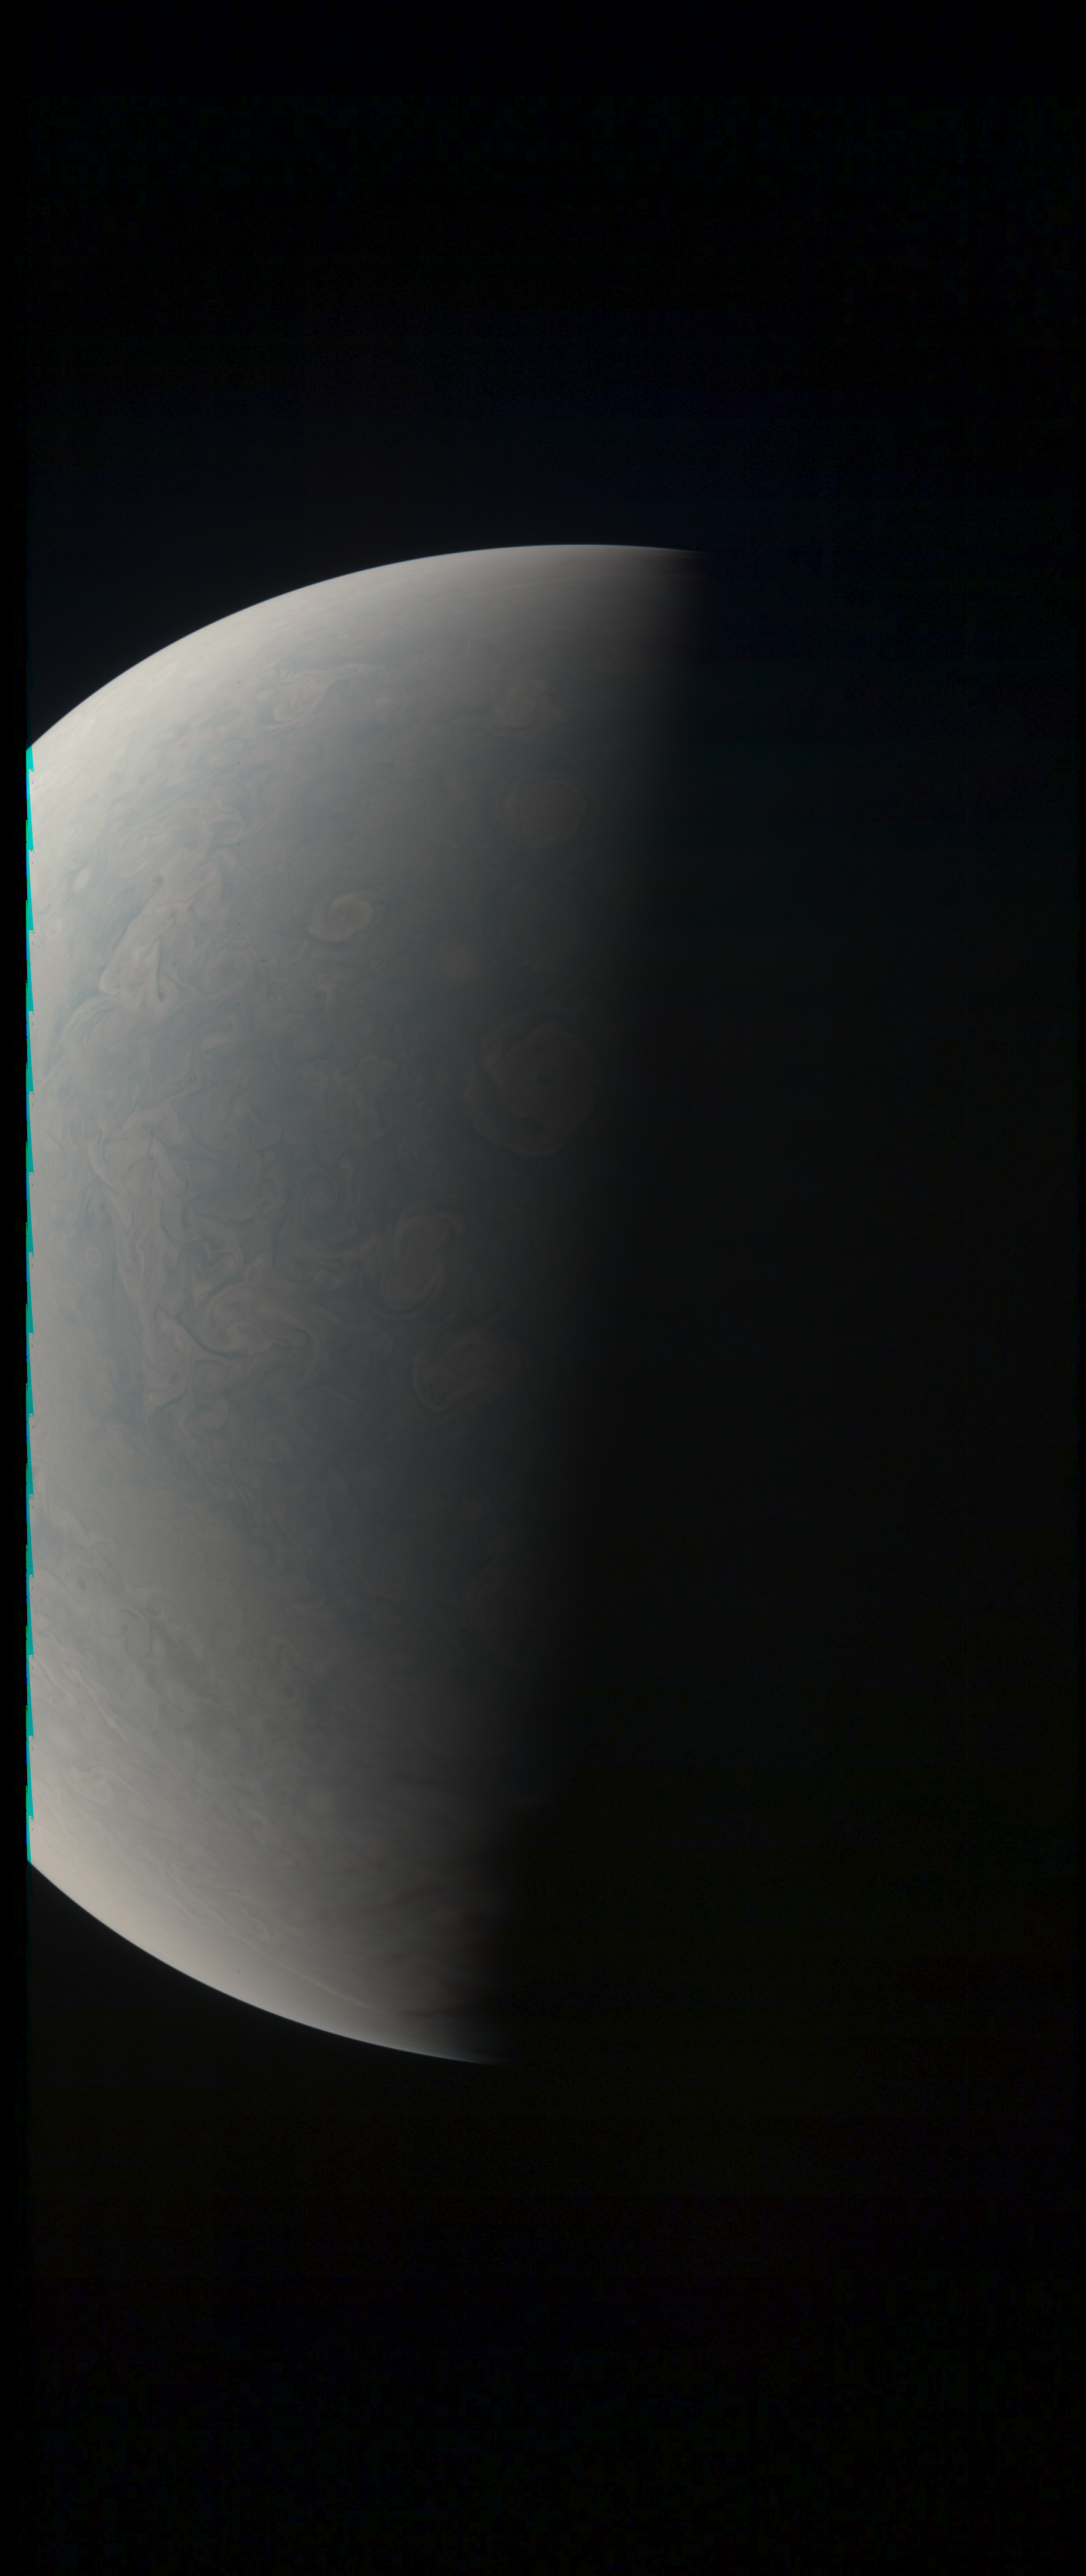 JNCE_2019043_18C00023_V01-raw_proc_hollow_sphere_c_pj_out.BMP_thumbnail_.png